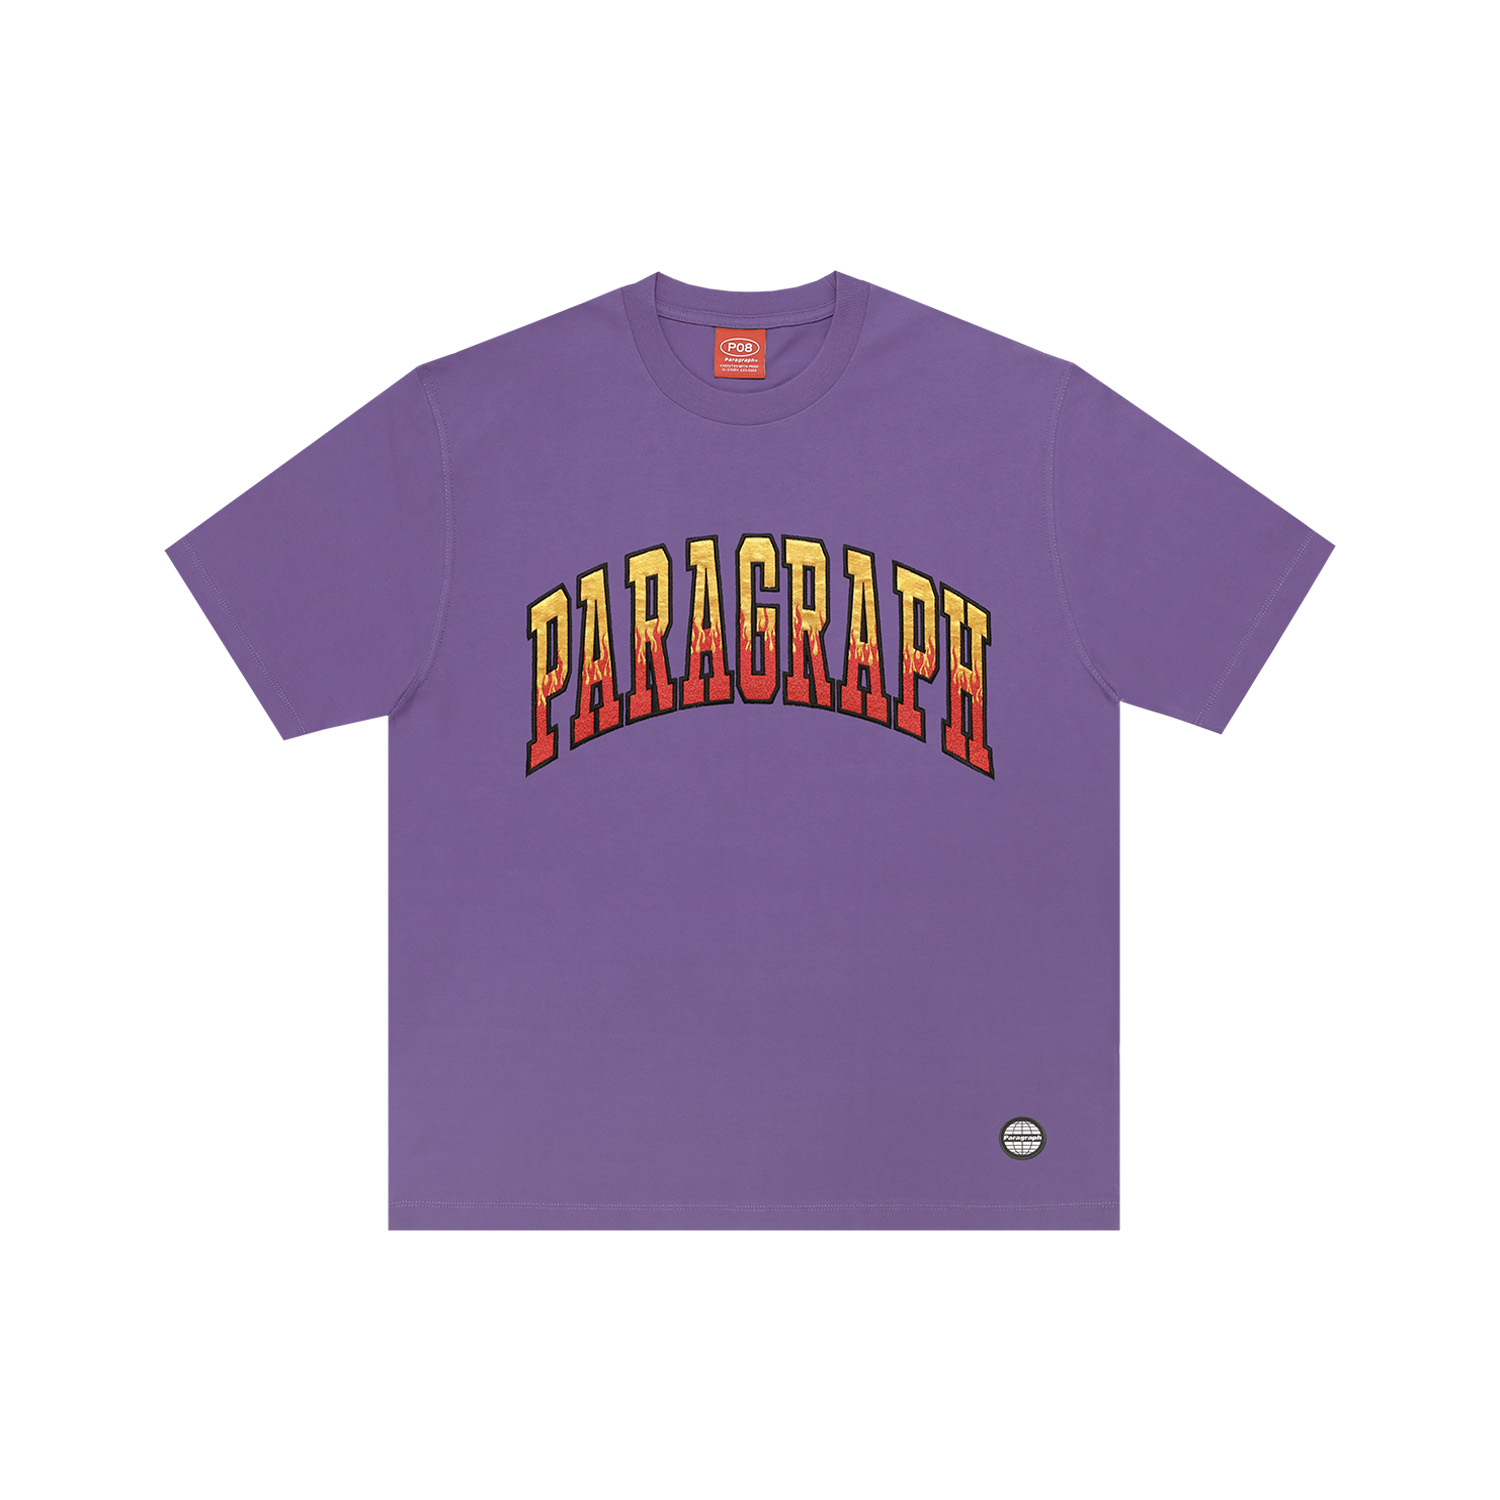 PARAGRAPH FLAME T SHIRTAvailable for delivery from September 22